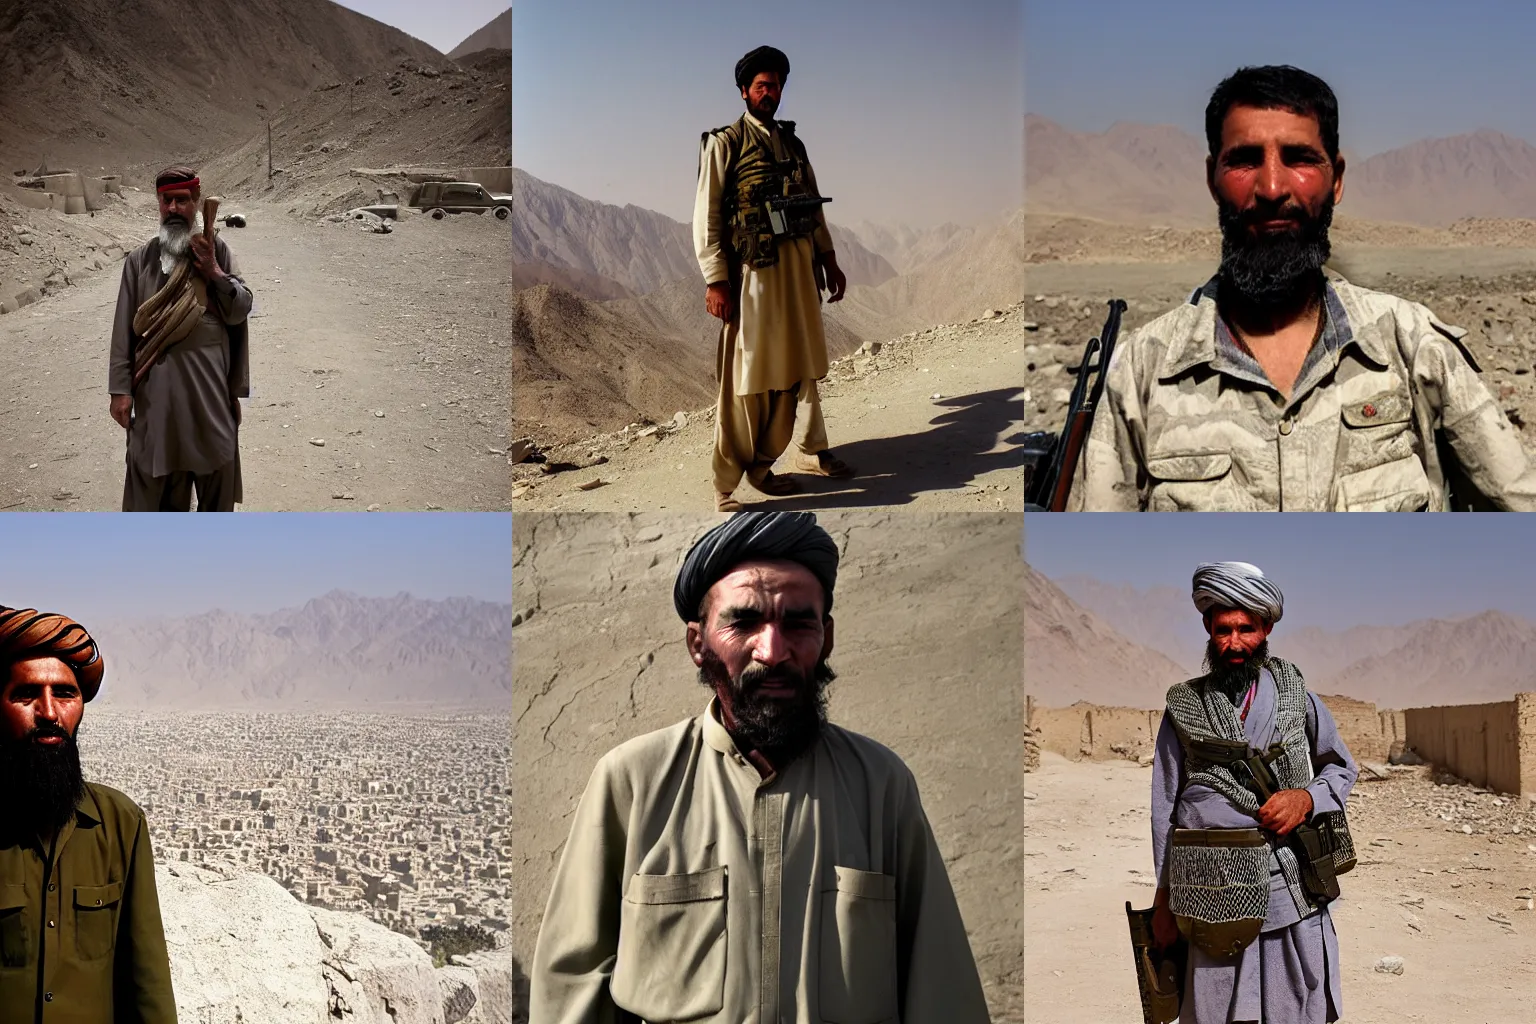 Prompt: A photograph of a man in Afghanistan